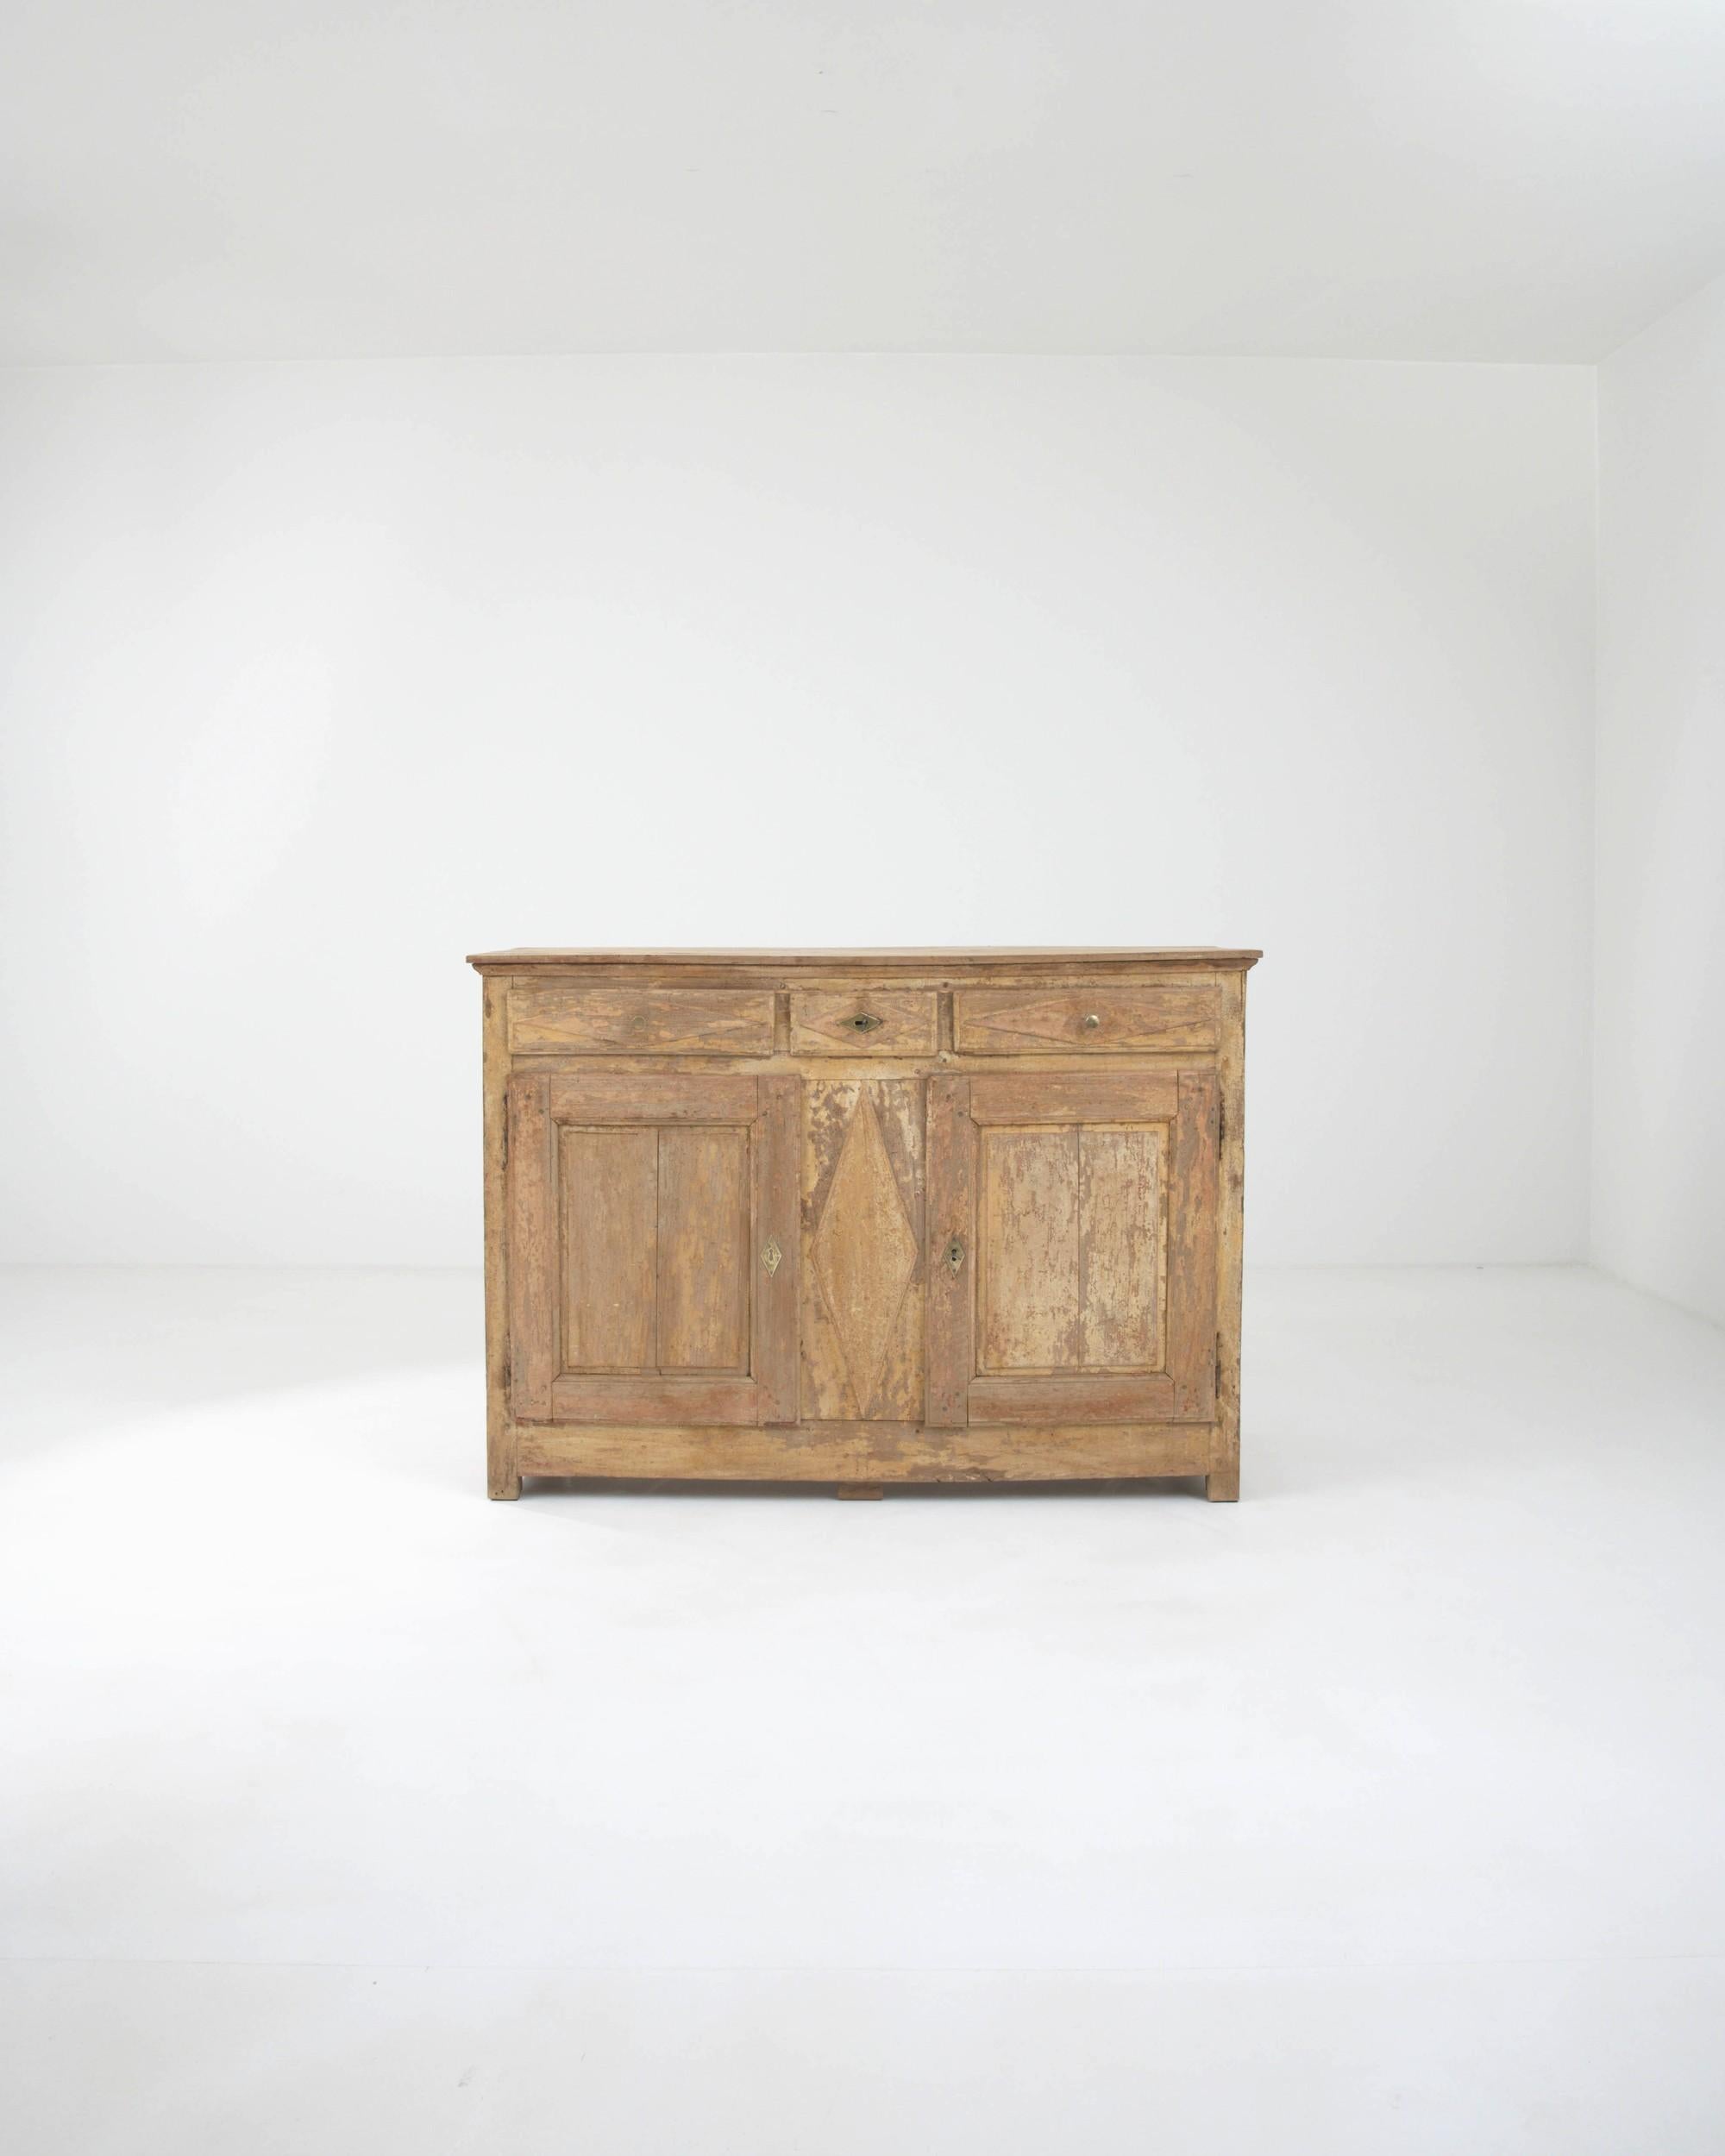 Made in France during the 19th century, this wooden buffet features three drawers resting above two square-panel doors, revealing ample compartments within. The rhombus carvings in the center elegantly complement the brass locks, adding an artistic